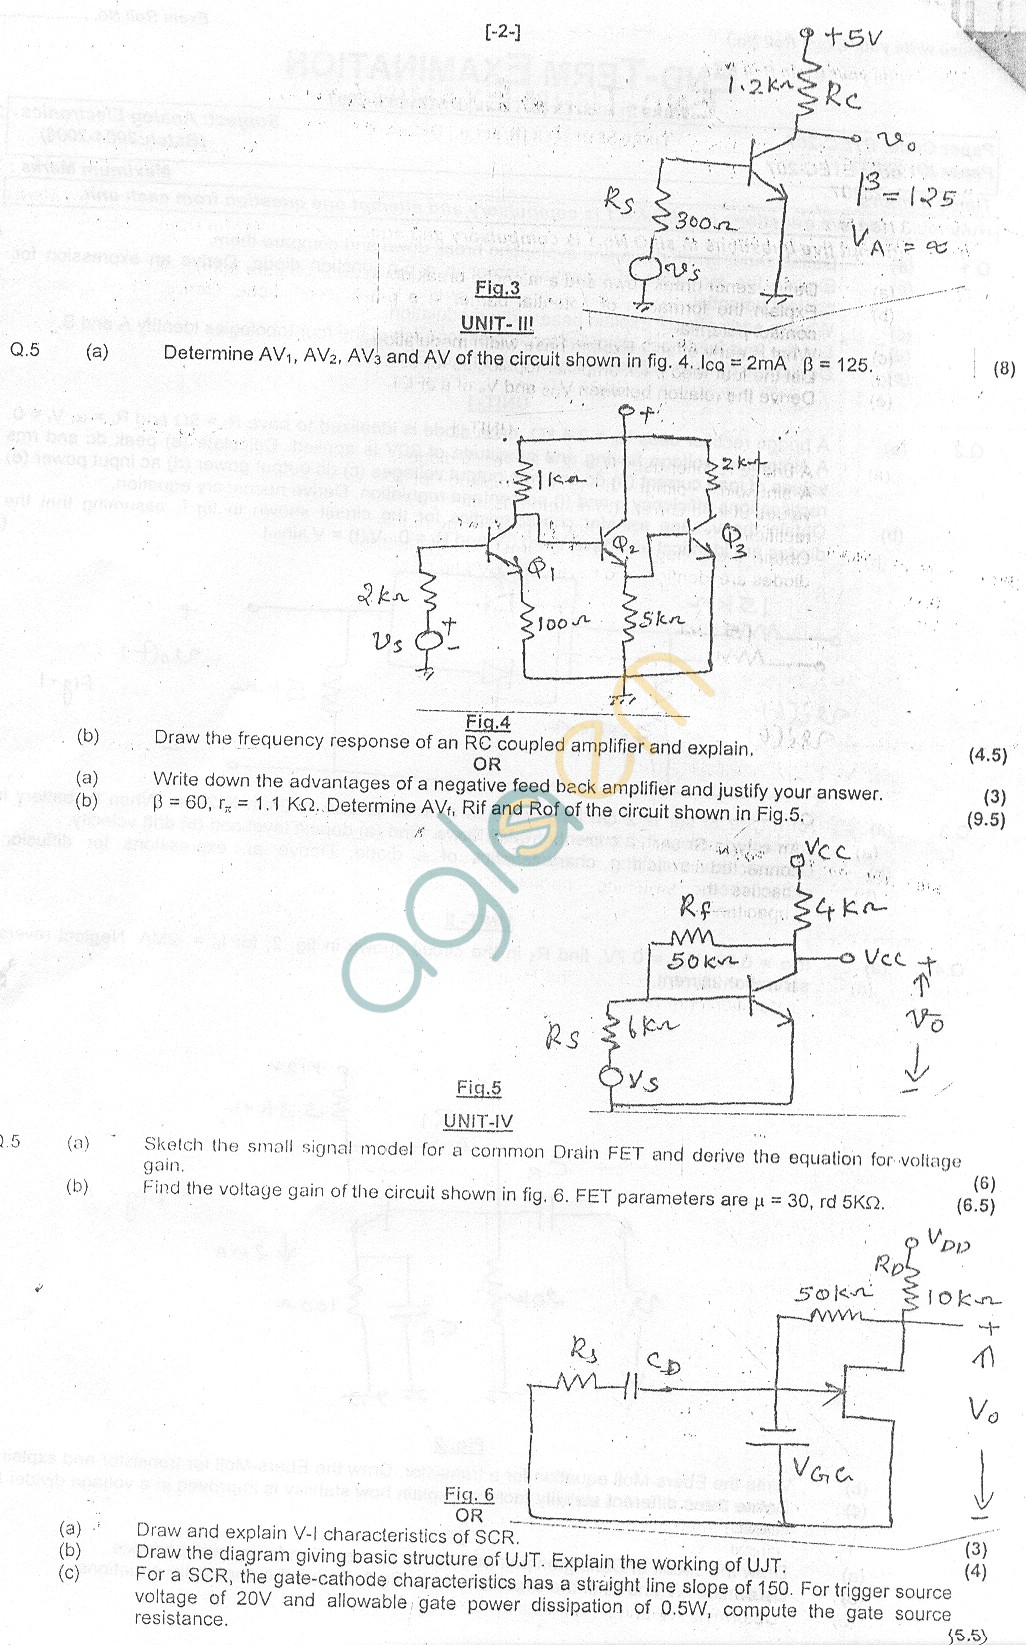 GGSIPU Question Papers Third Semester  End Term 2007  ETEE-203